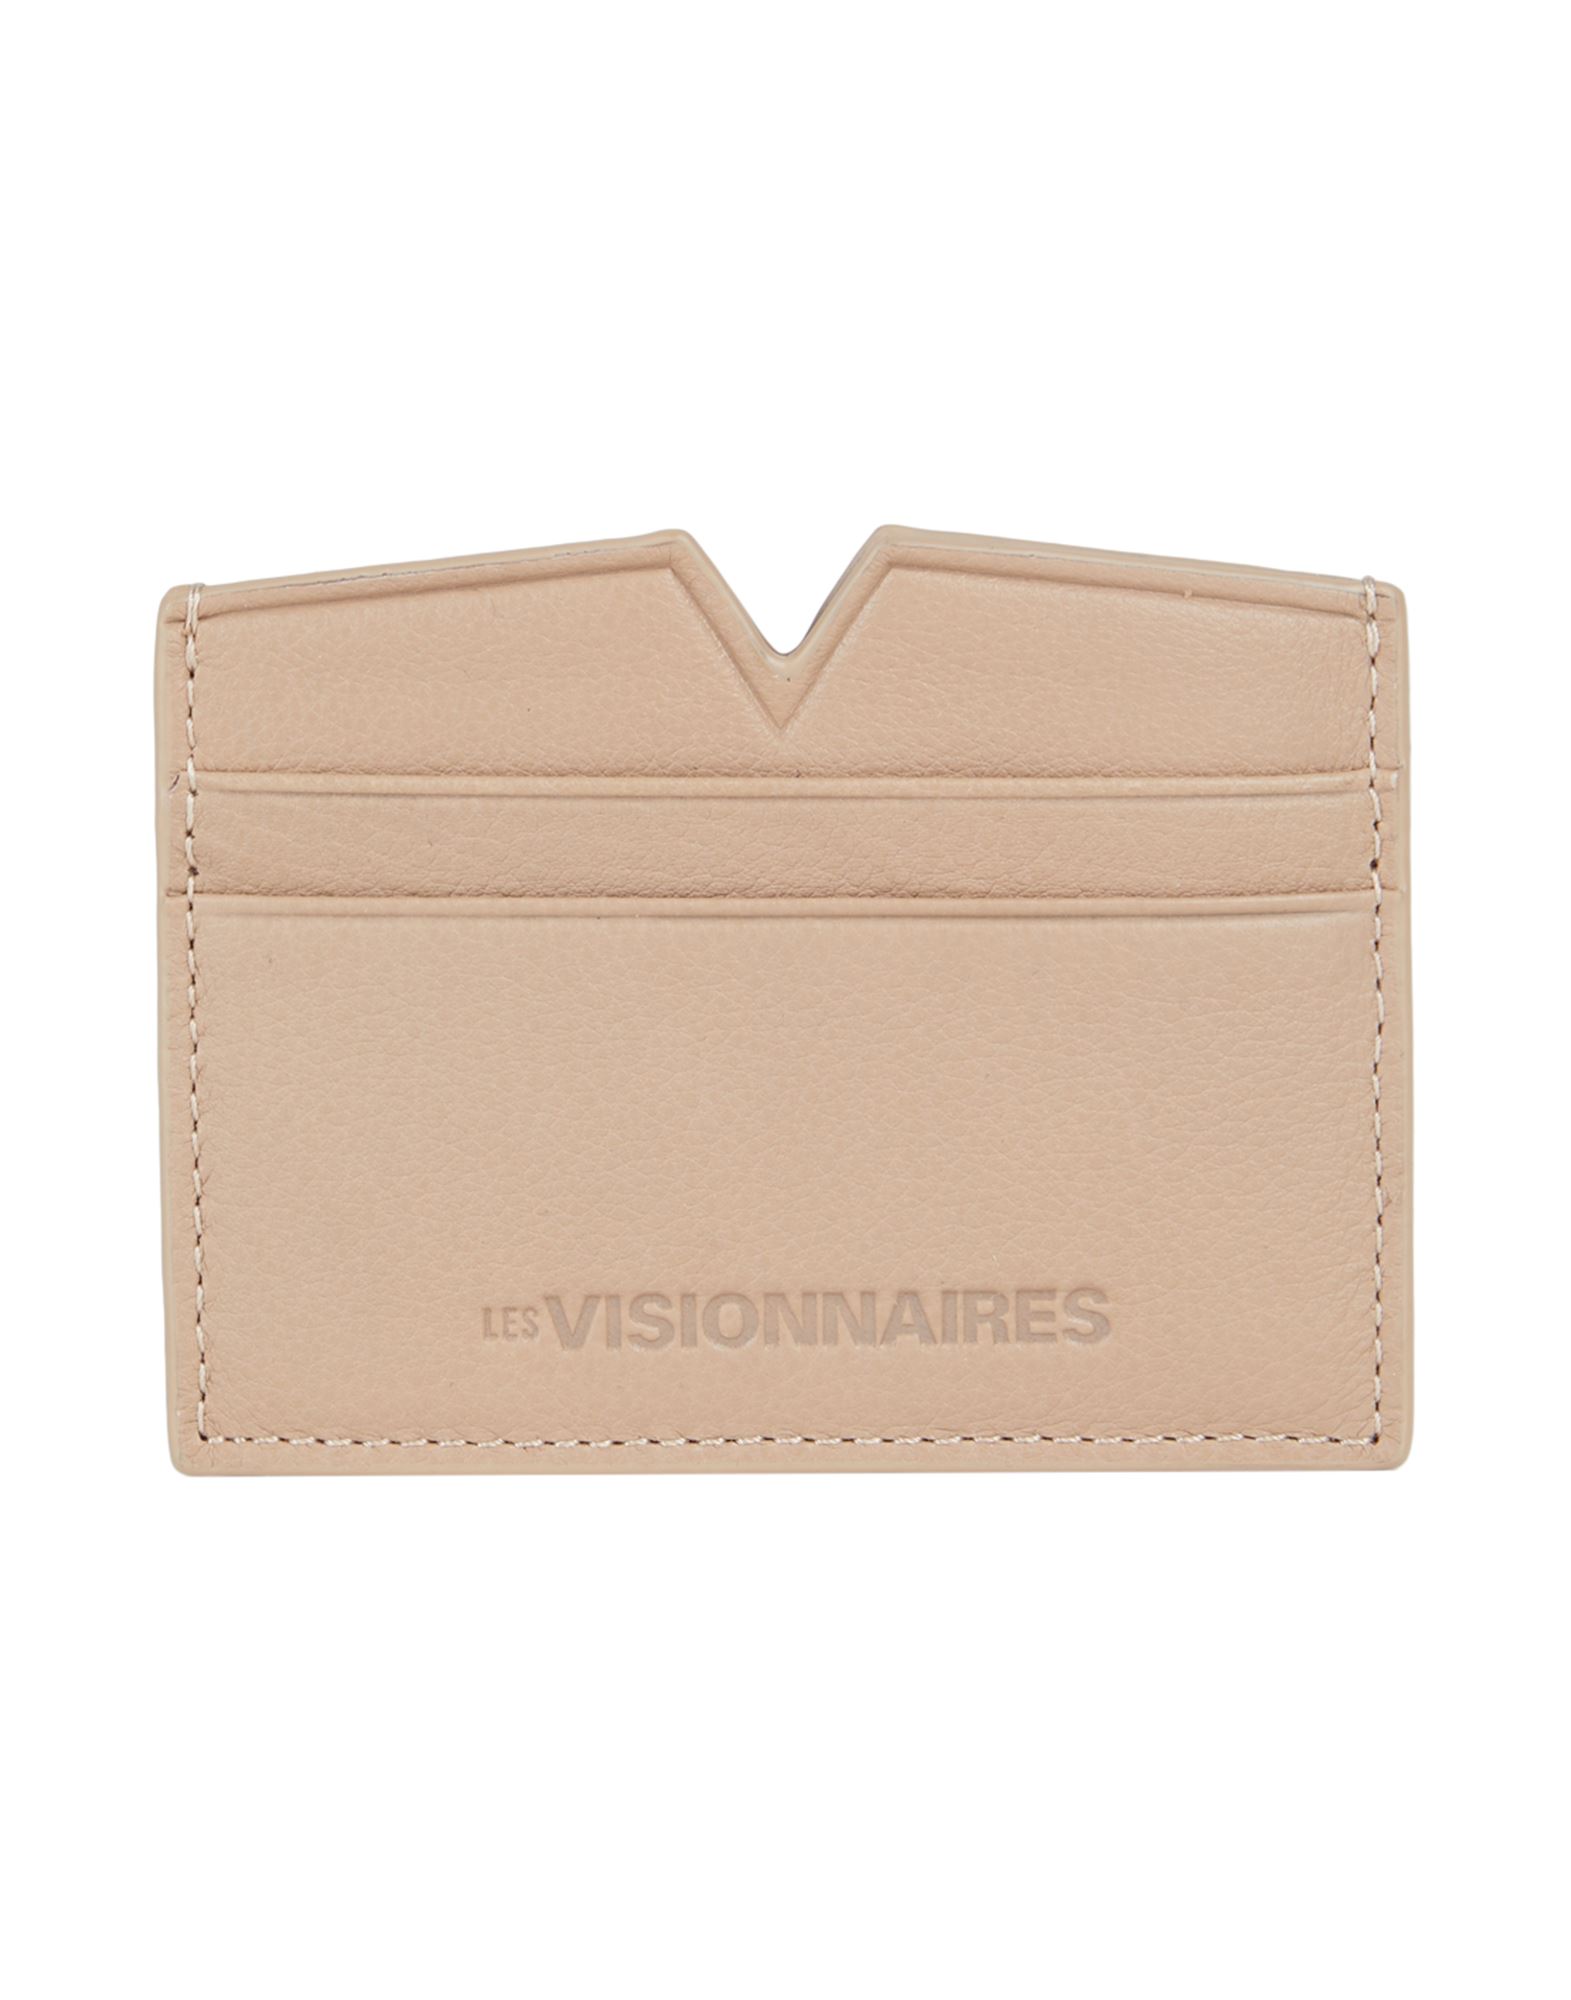 Les Visionnaires Document Holders In Beige